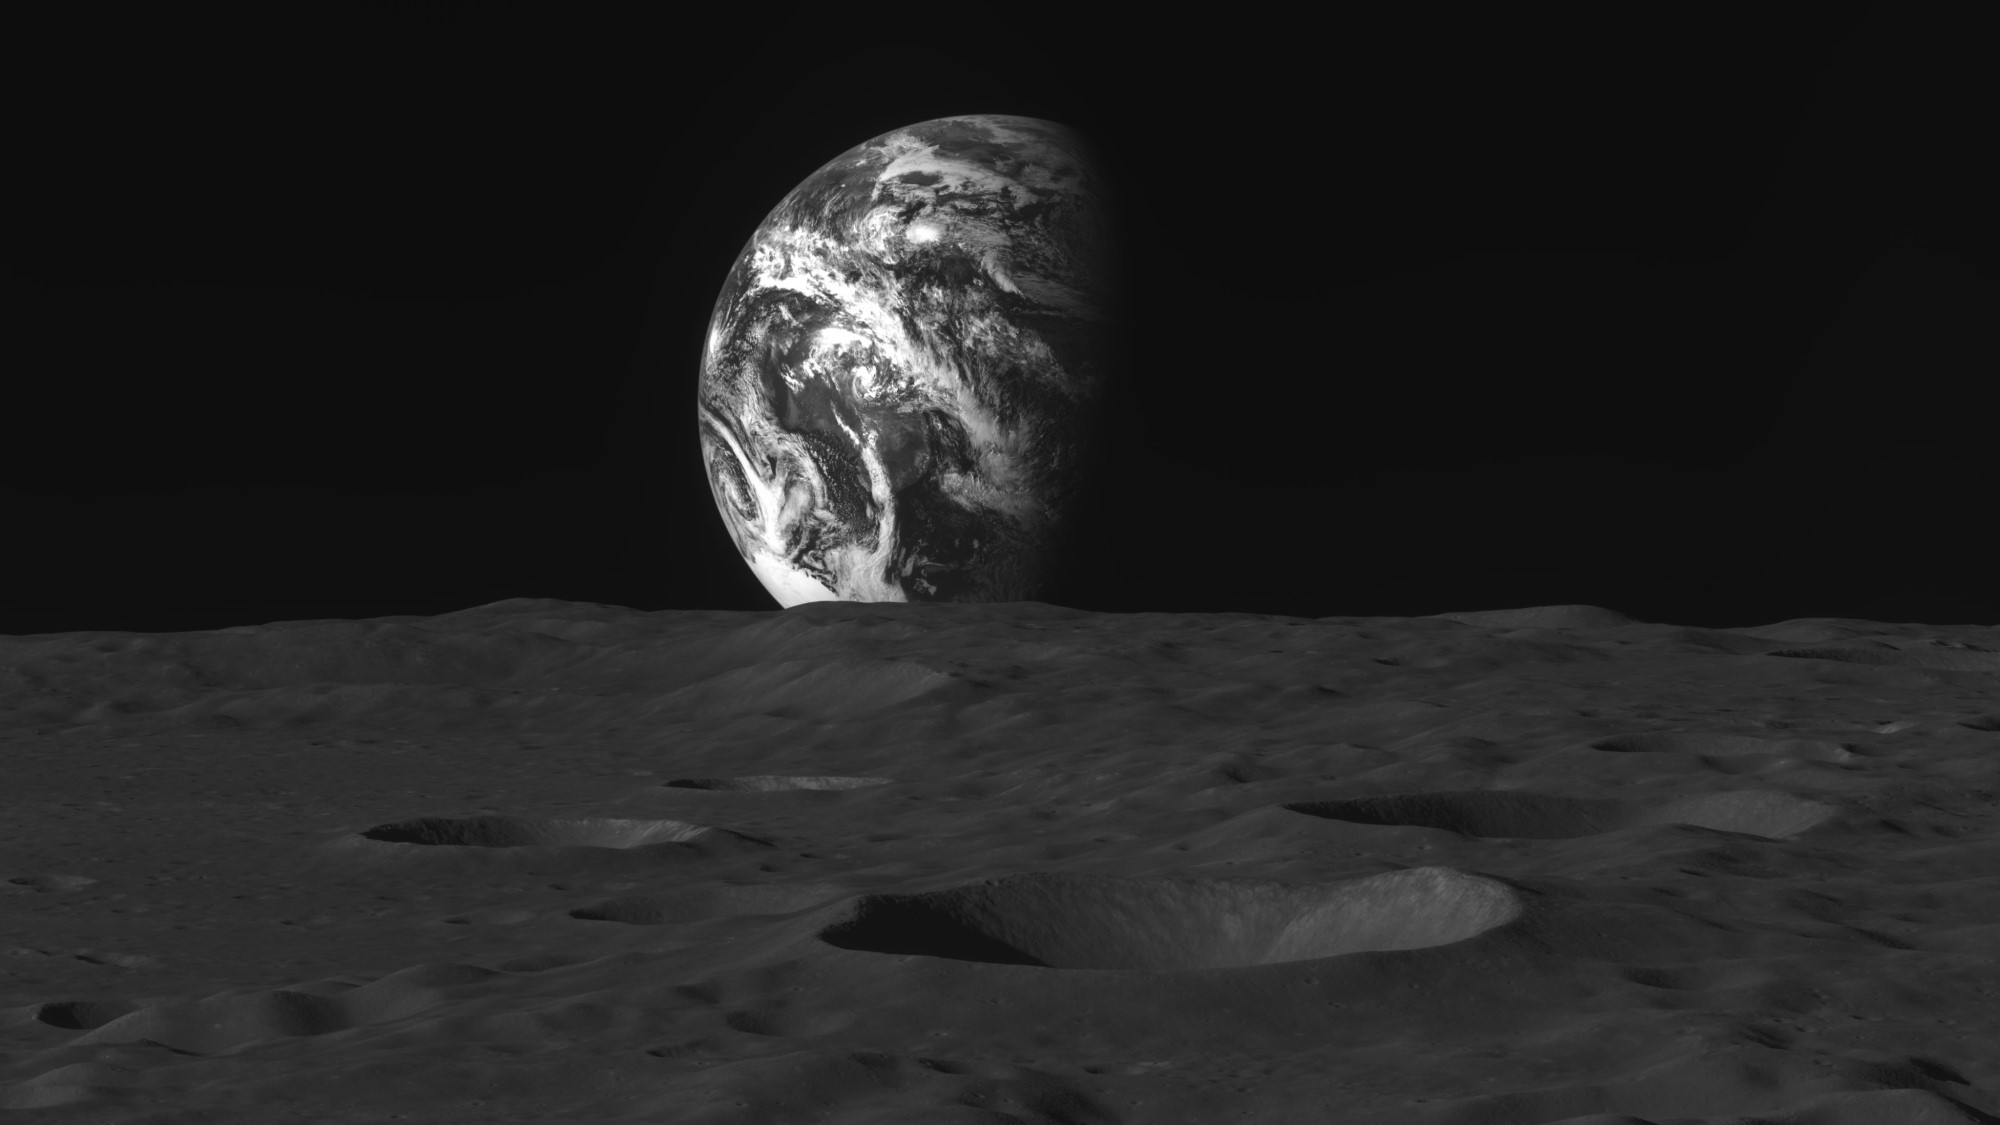 South Korea's moon mission snaps stunning Earth pics after successful lunar arrival